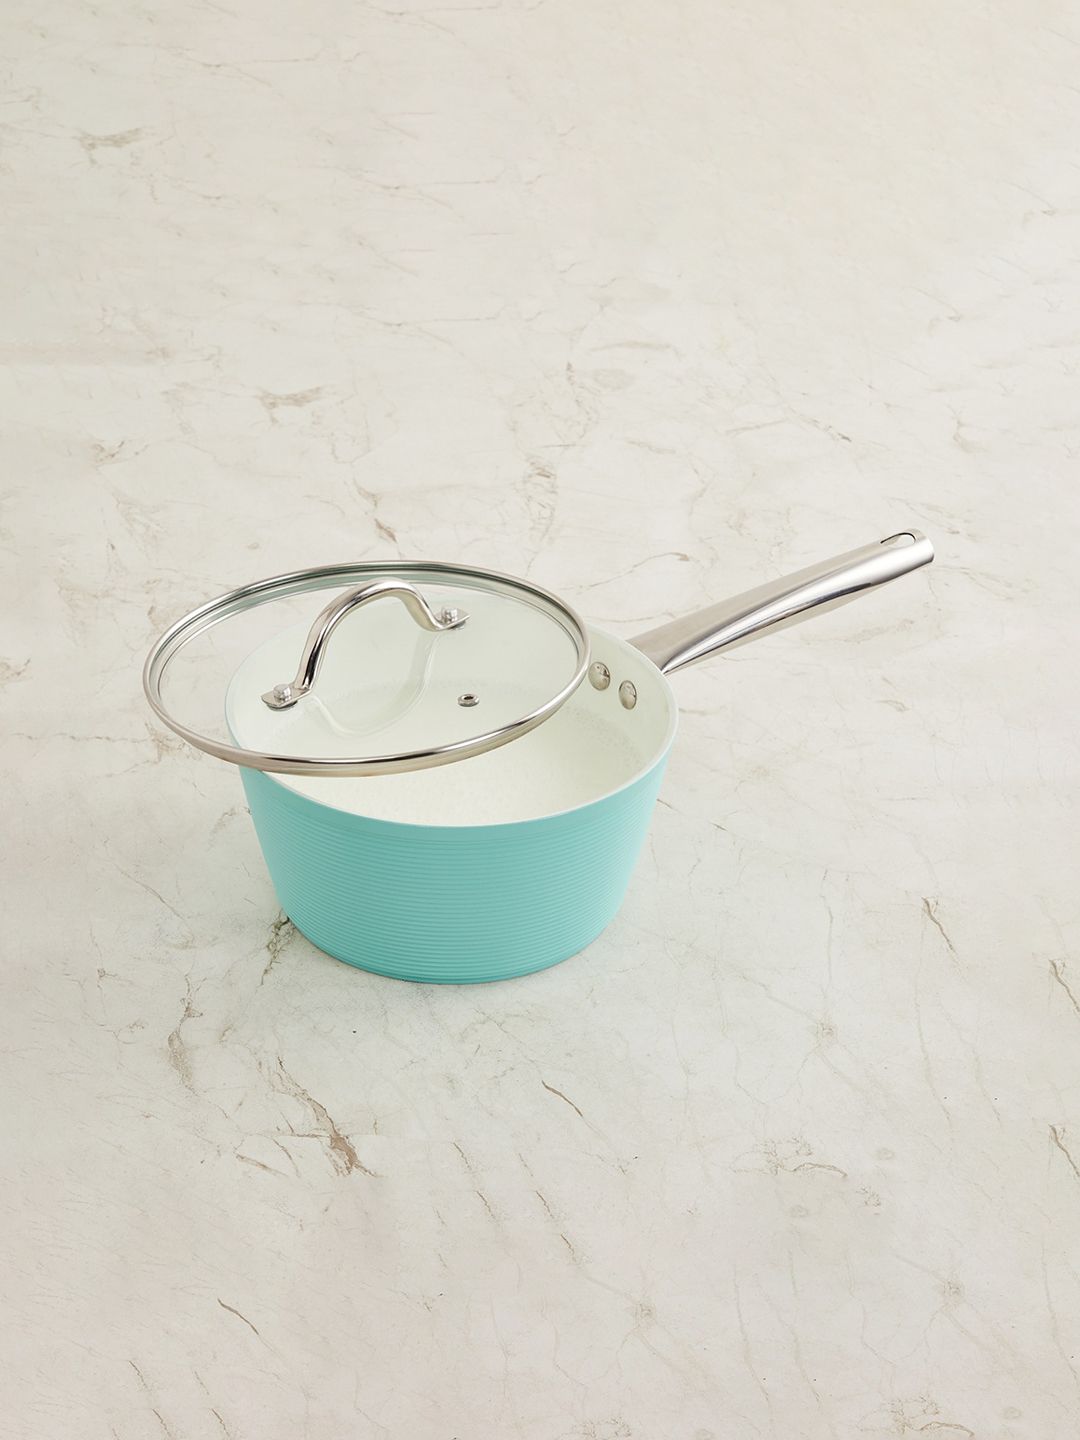 Home Centre Teal Blue & Silver-Toned Milk Pan With Glass Lid Price in India